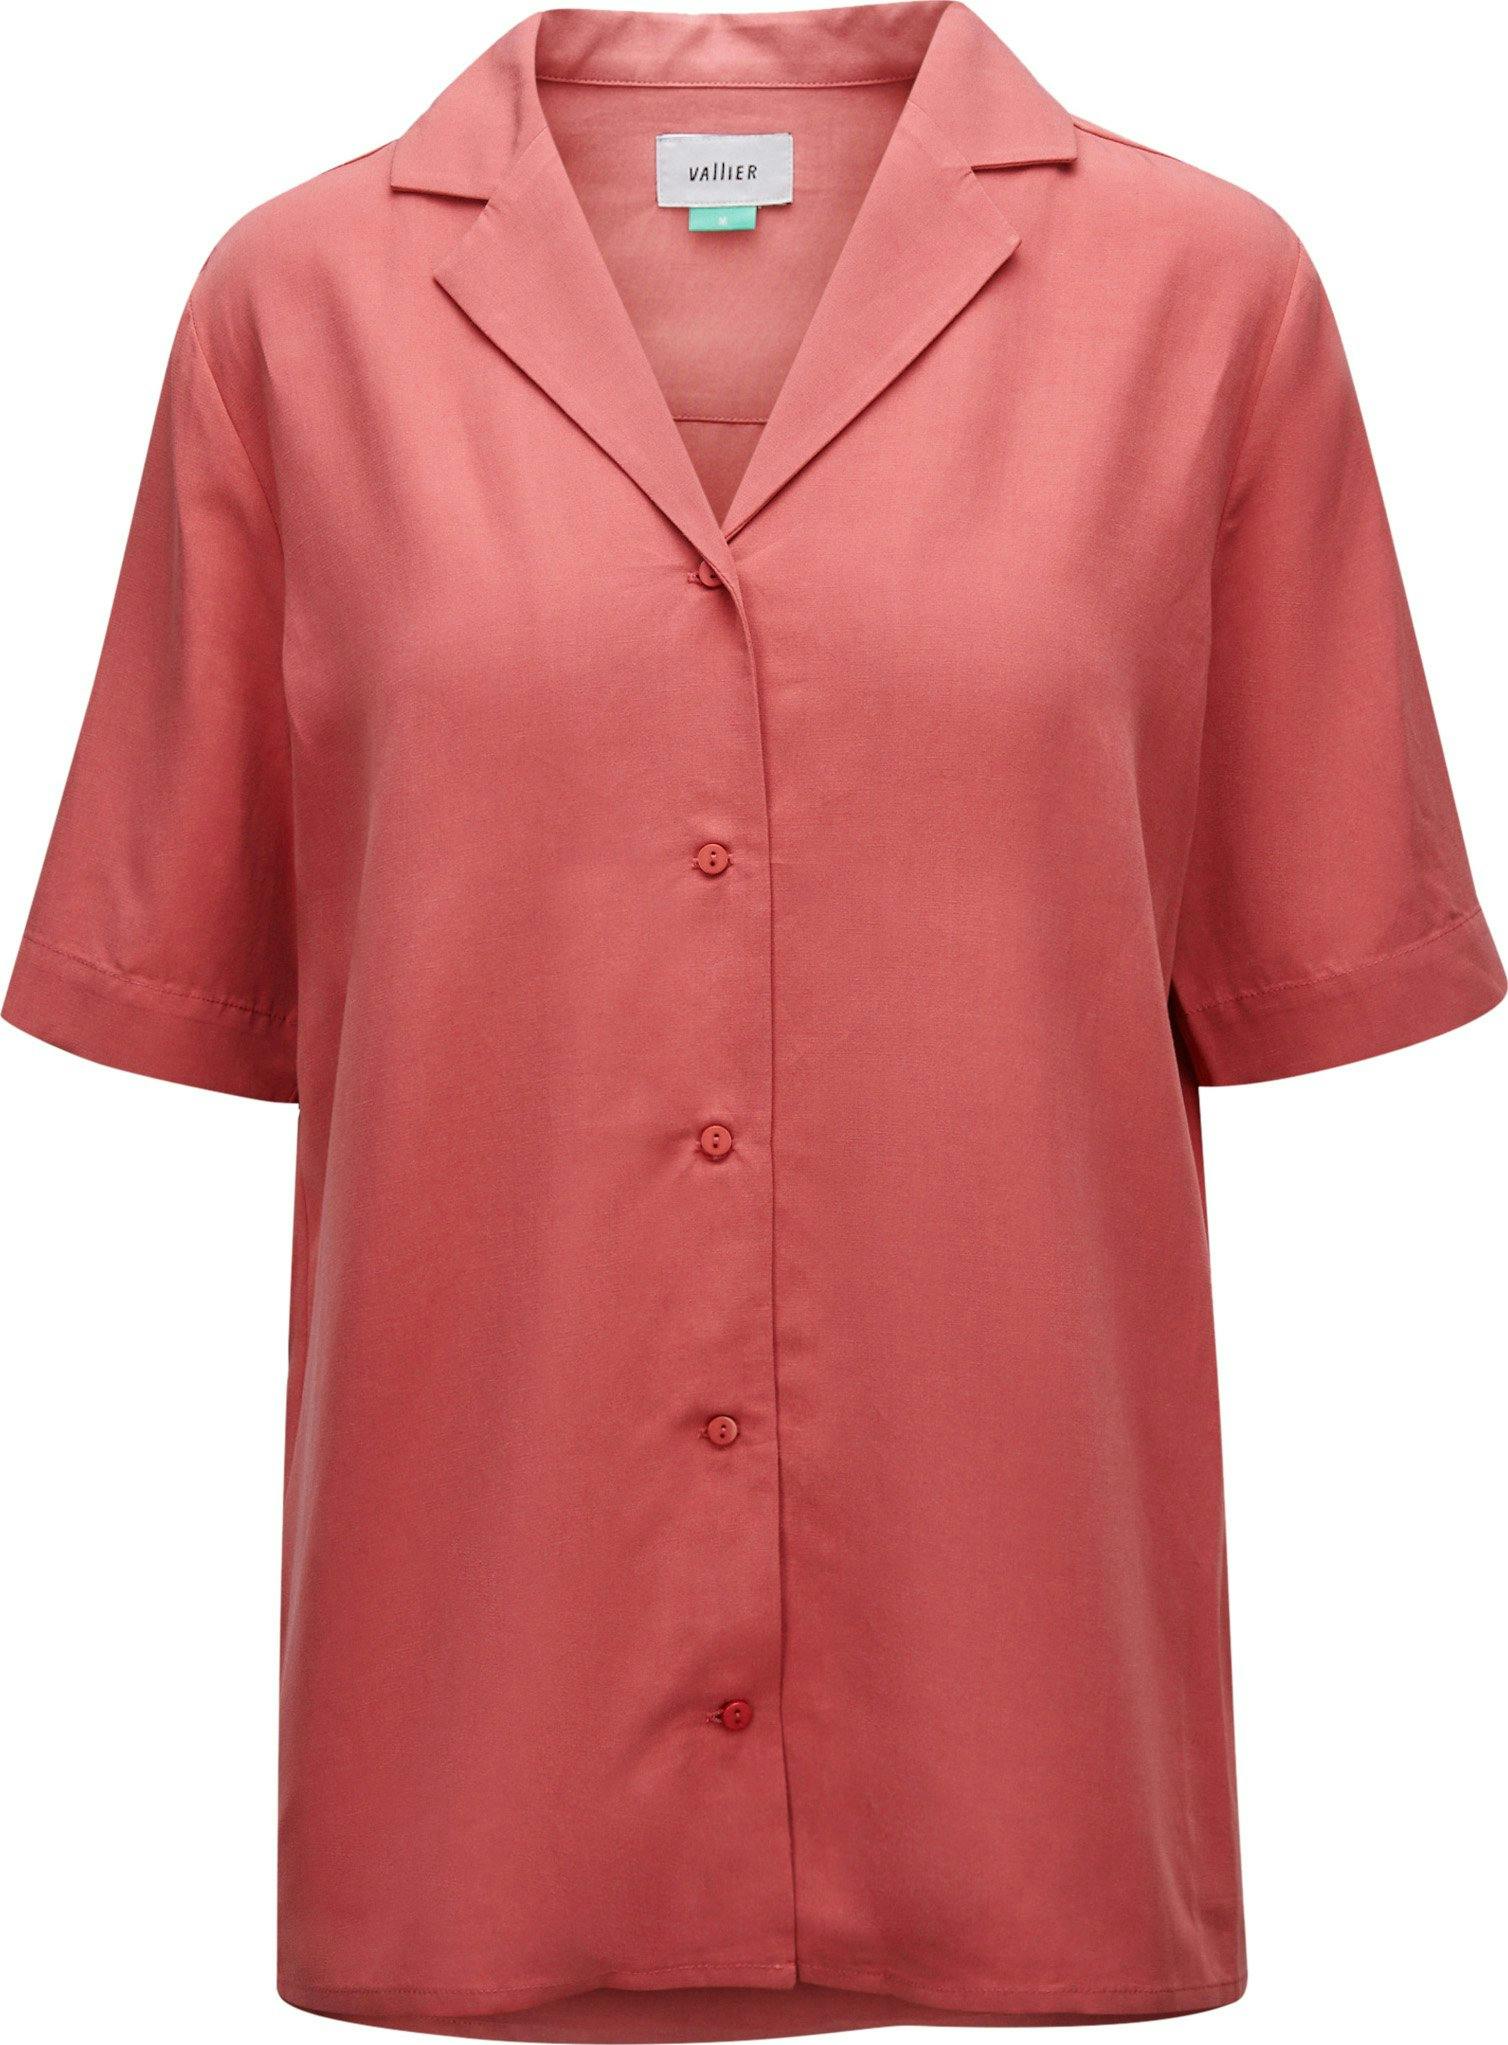 Product image for Vedado Blouse - Women's